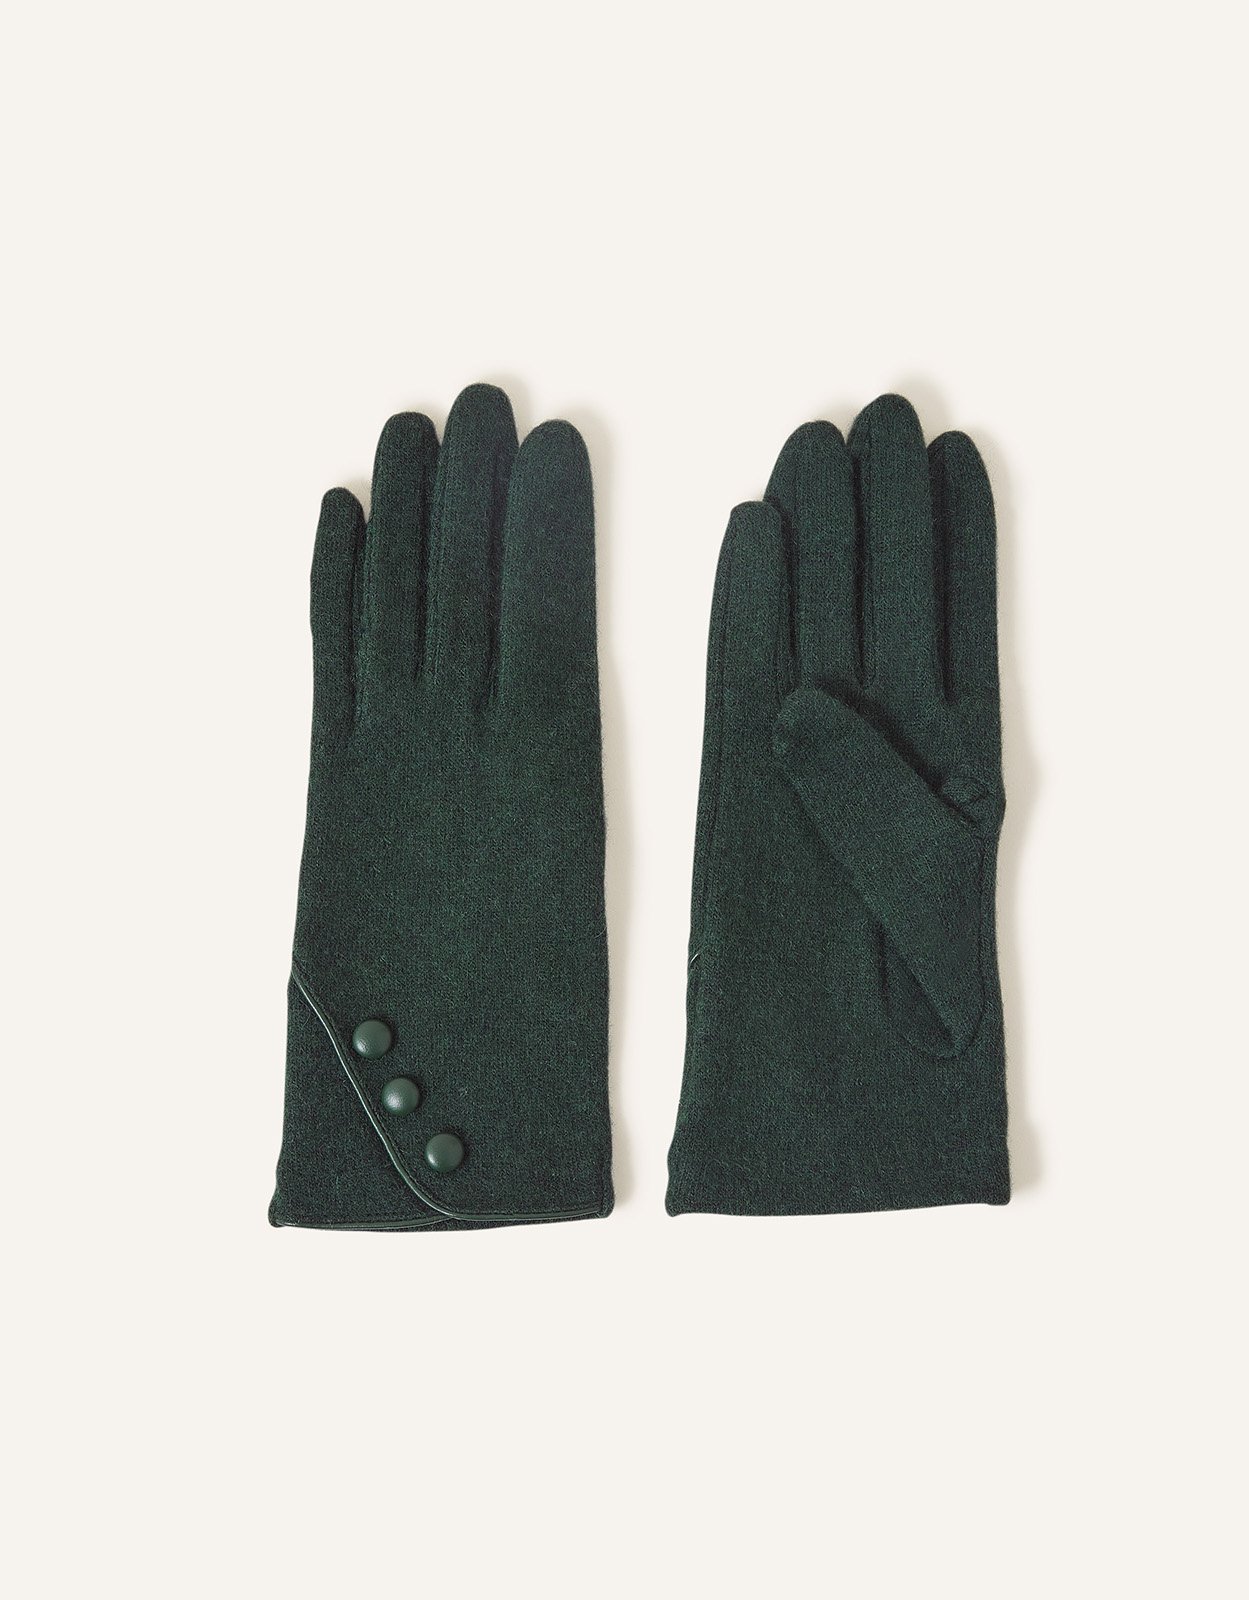 Accessorize Women's Touchscreen Button Gloves in Wool Blend Green, Size: One Size